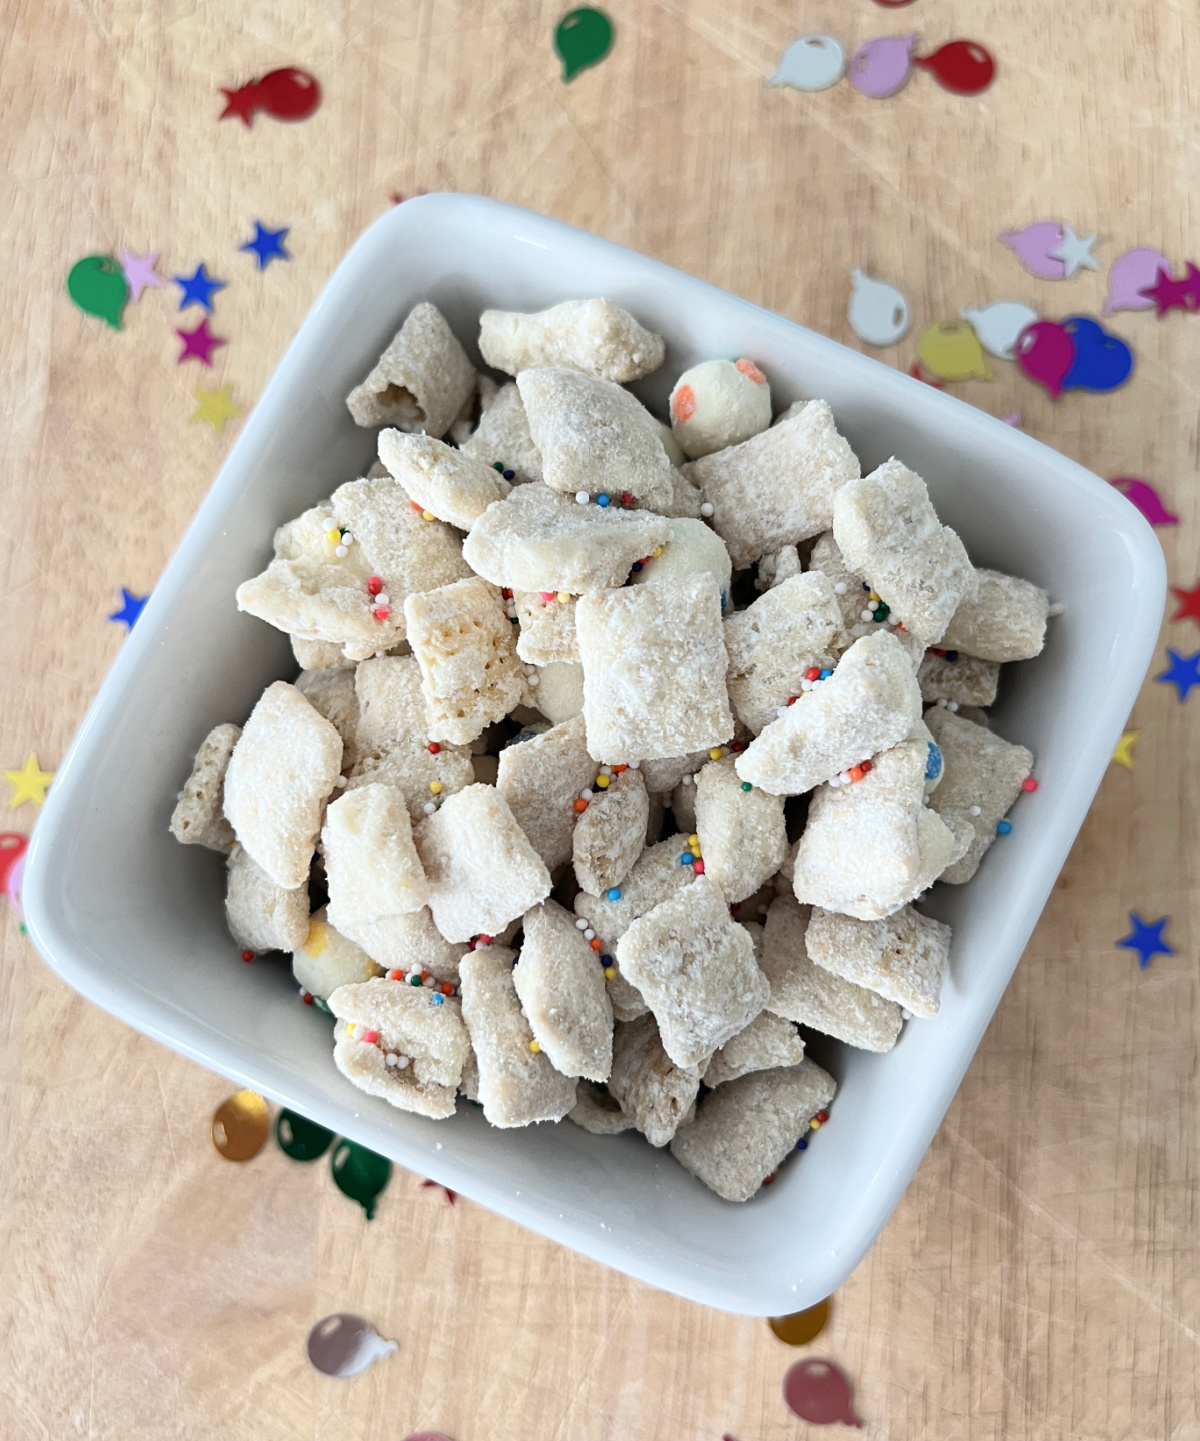 Recipe for Birthday Cake Puppy Chow: